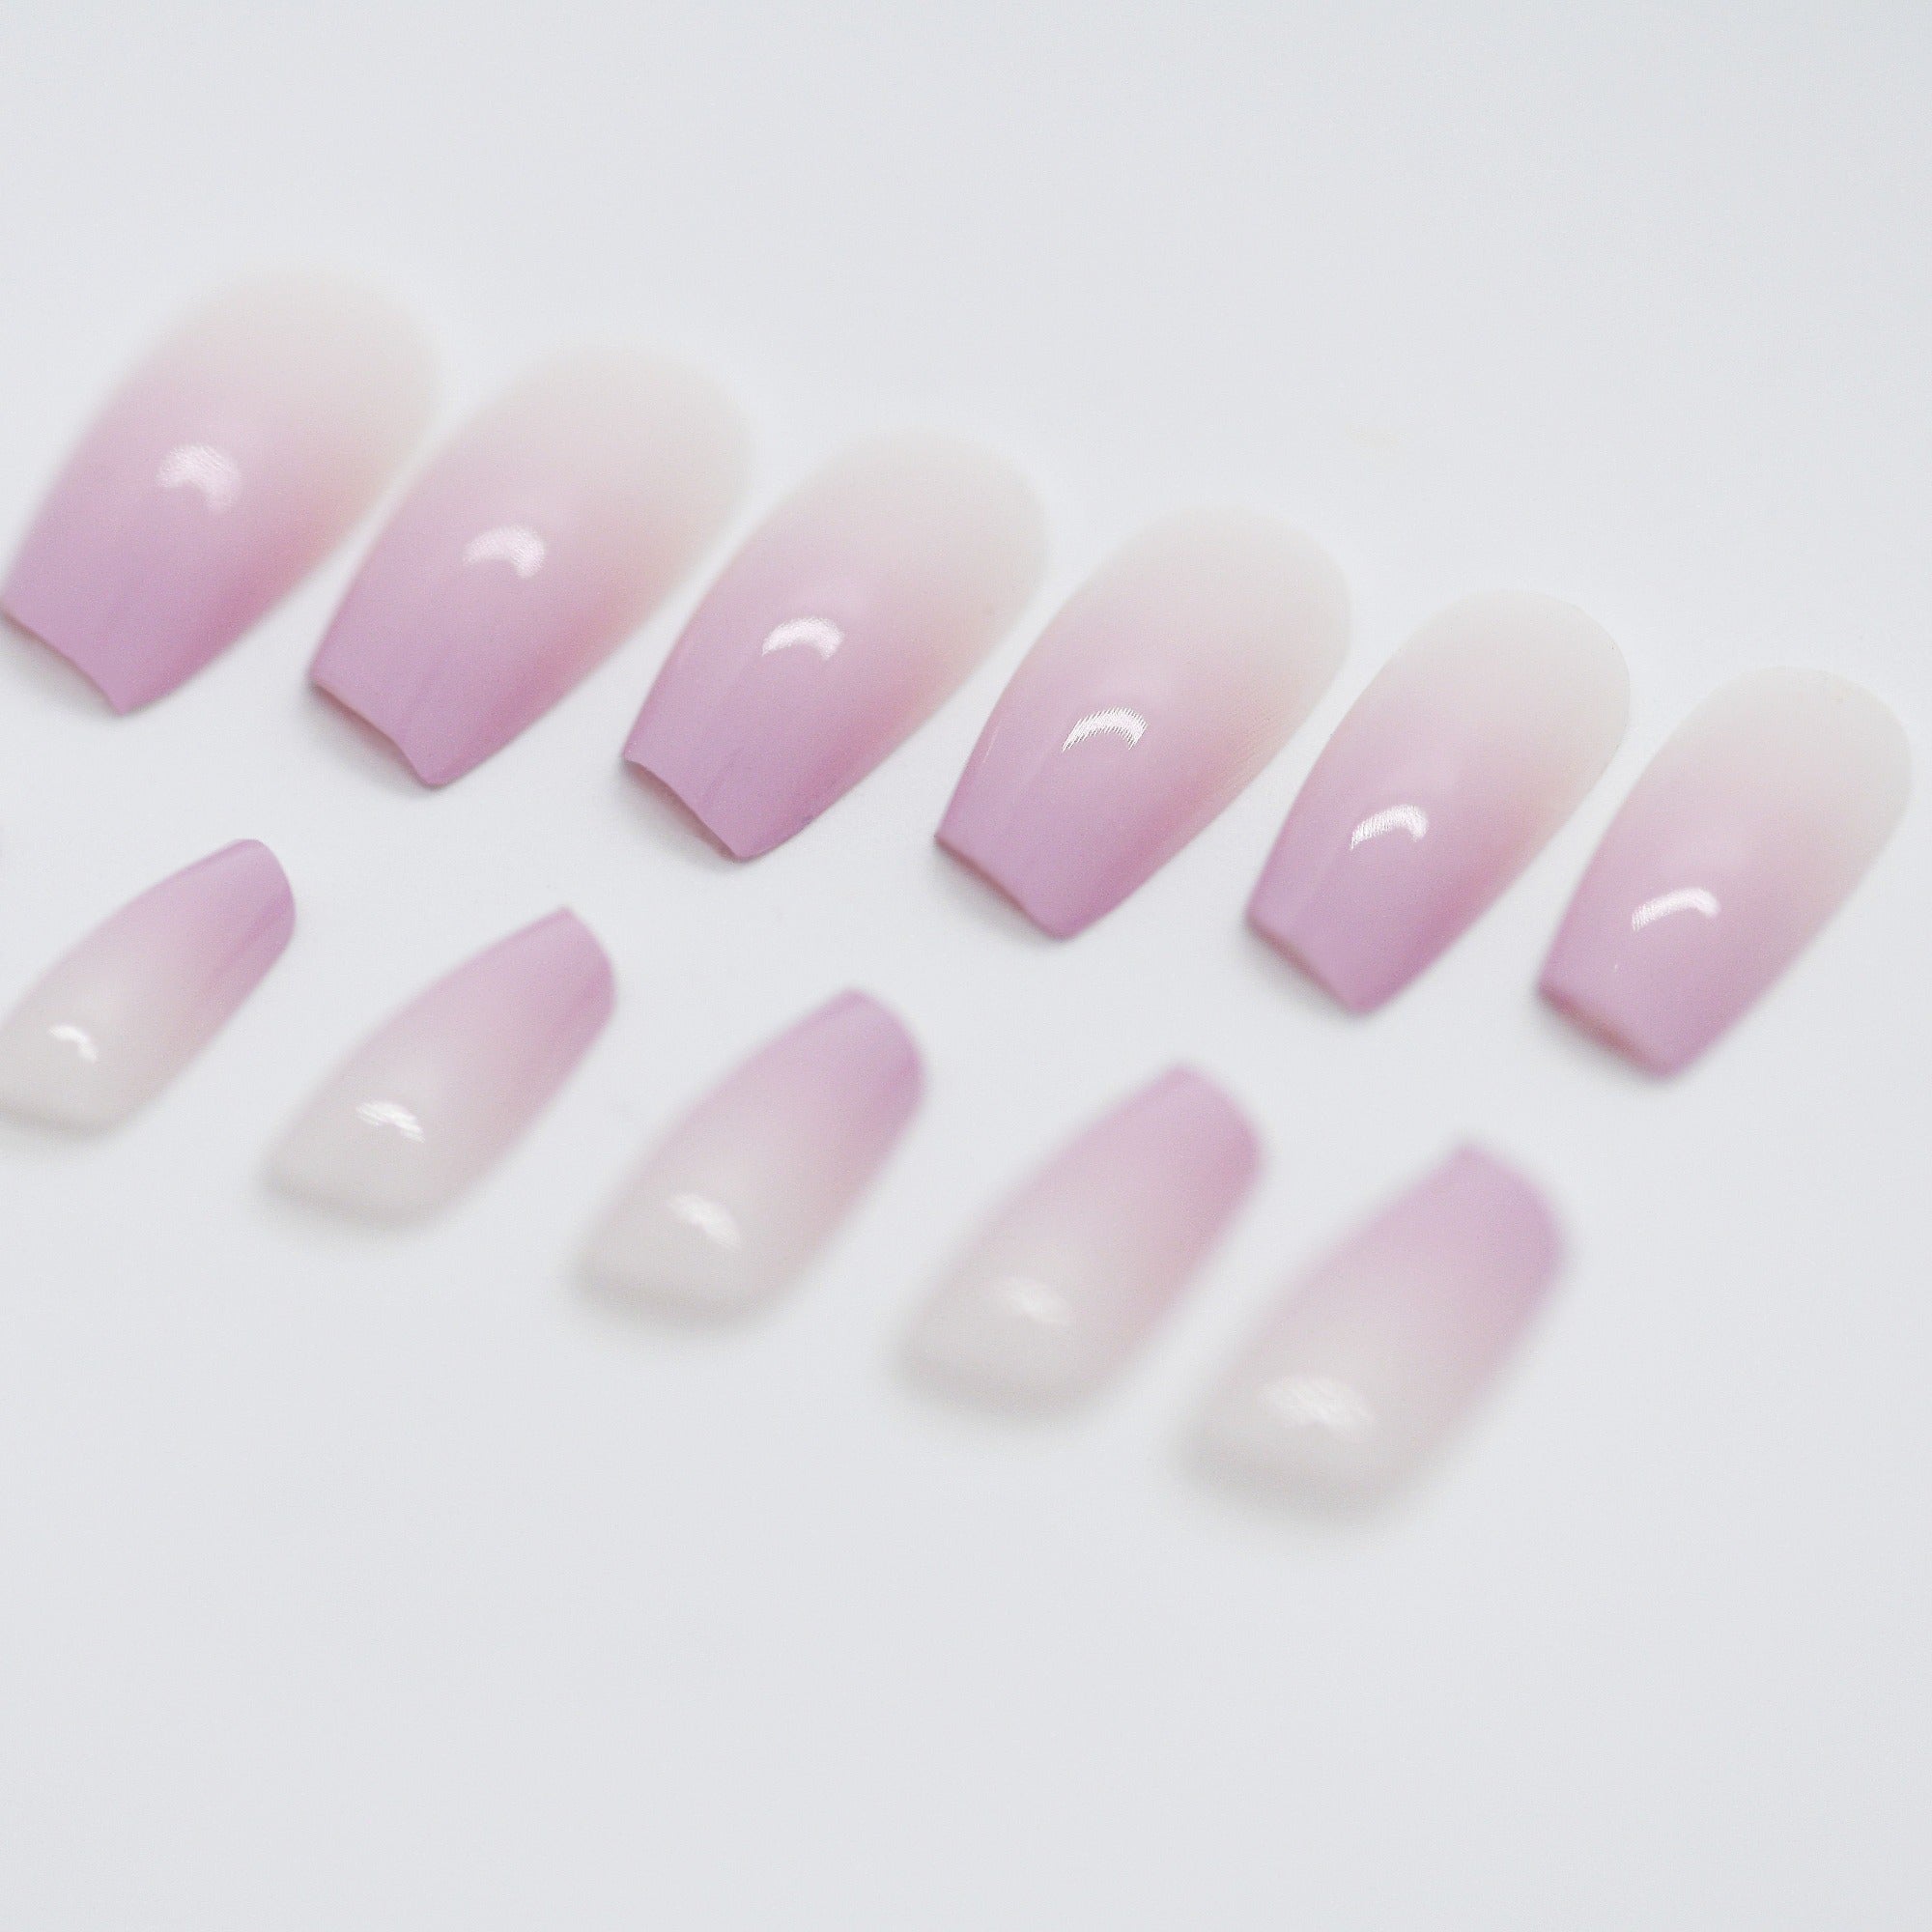 products/cliqonu_lilac_20snow_ombre_20press_20on_20nails_lipstick_20shape_20nails_low_edited.jpg